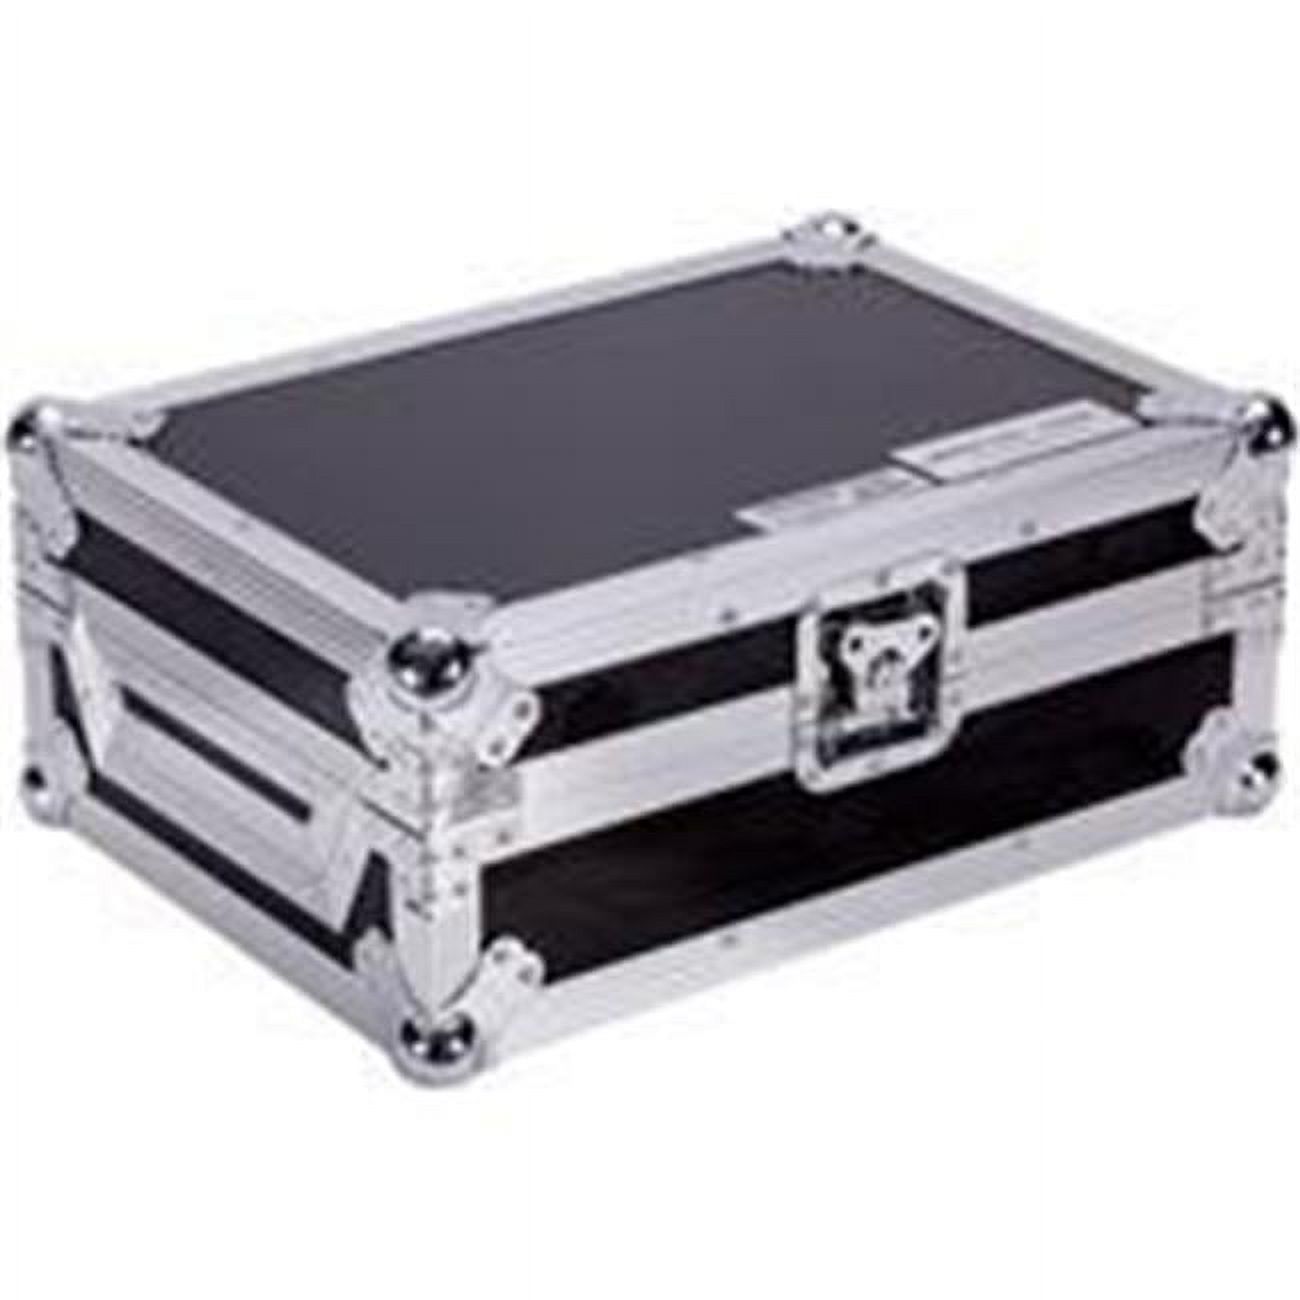 Fly Drive Cases for Pioneer CDJ-2000 & CDJ-2000NSX2 or Similarly Sized Equipment - image 1 of 1